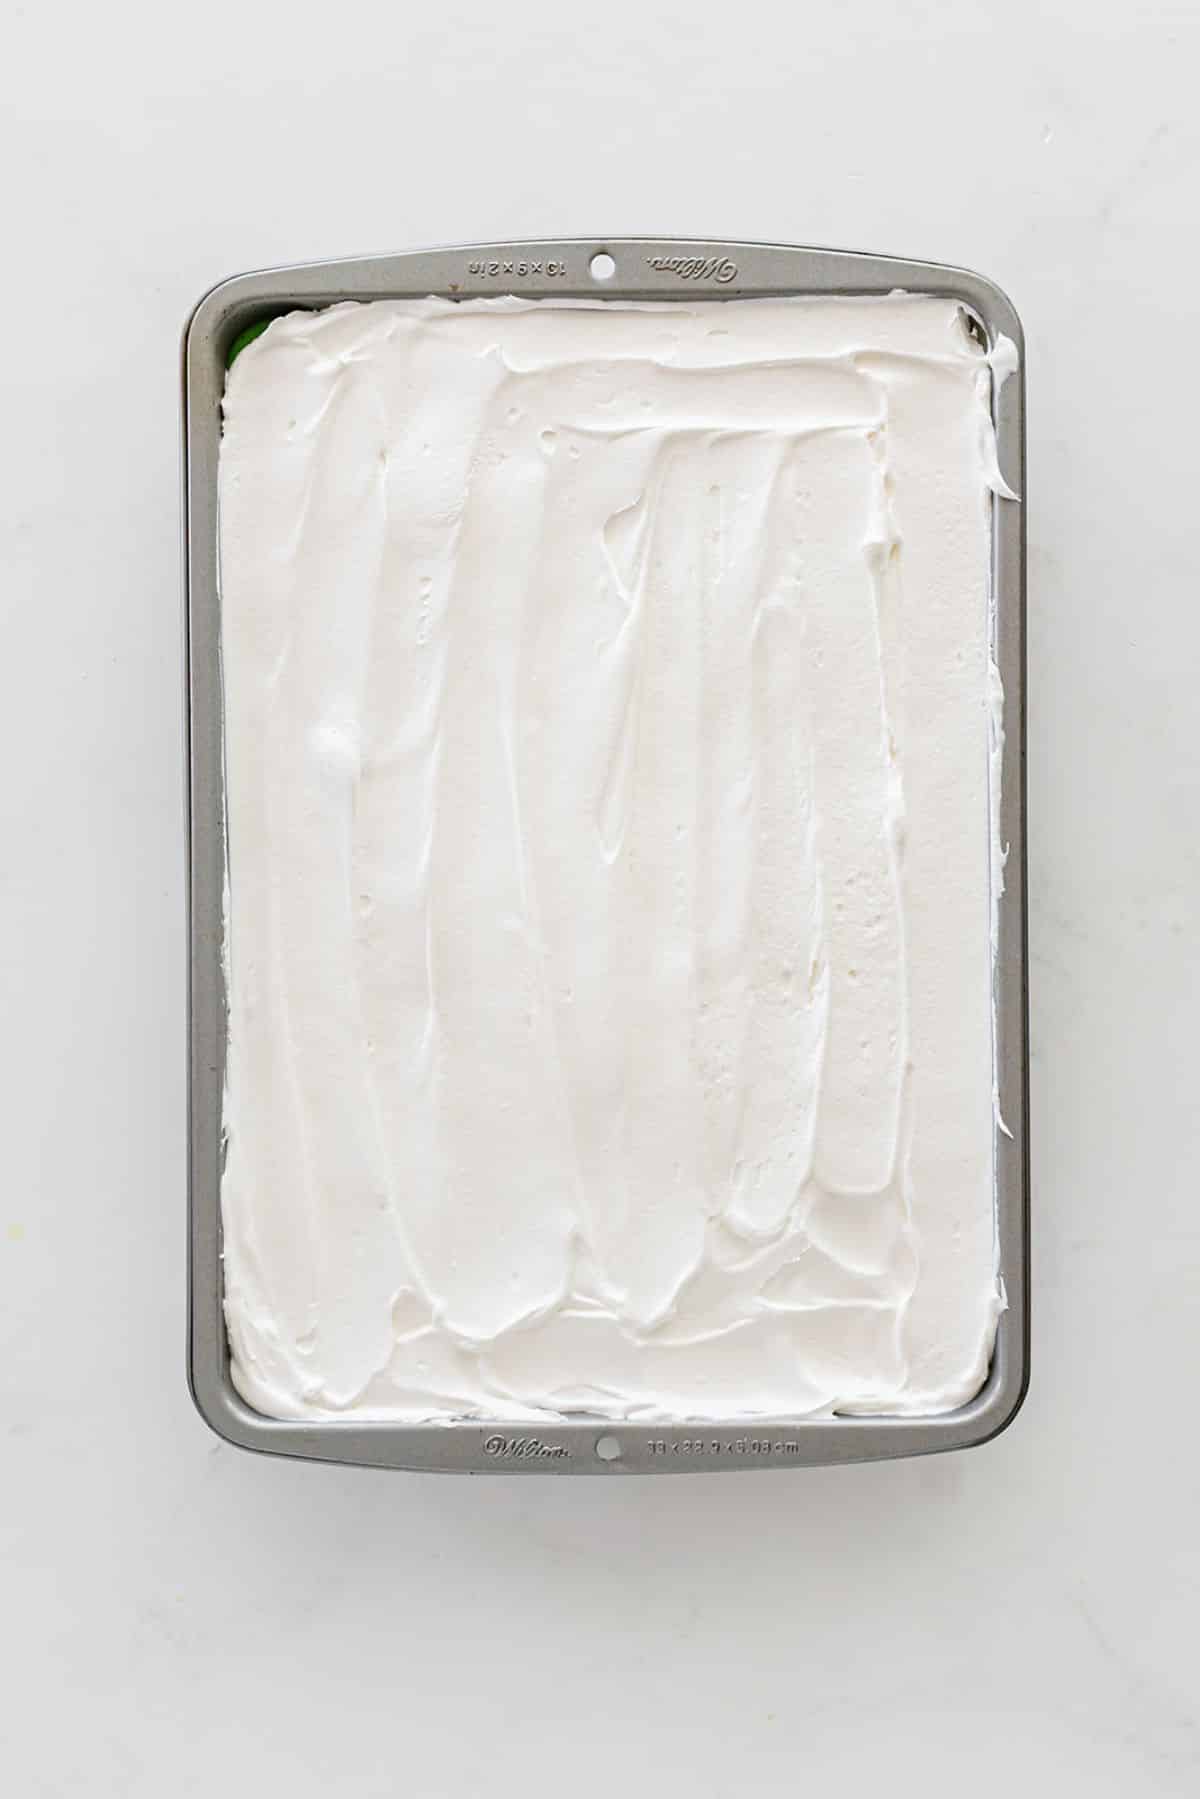 The remaining Cool Whip spread on top in the pan.